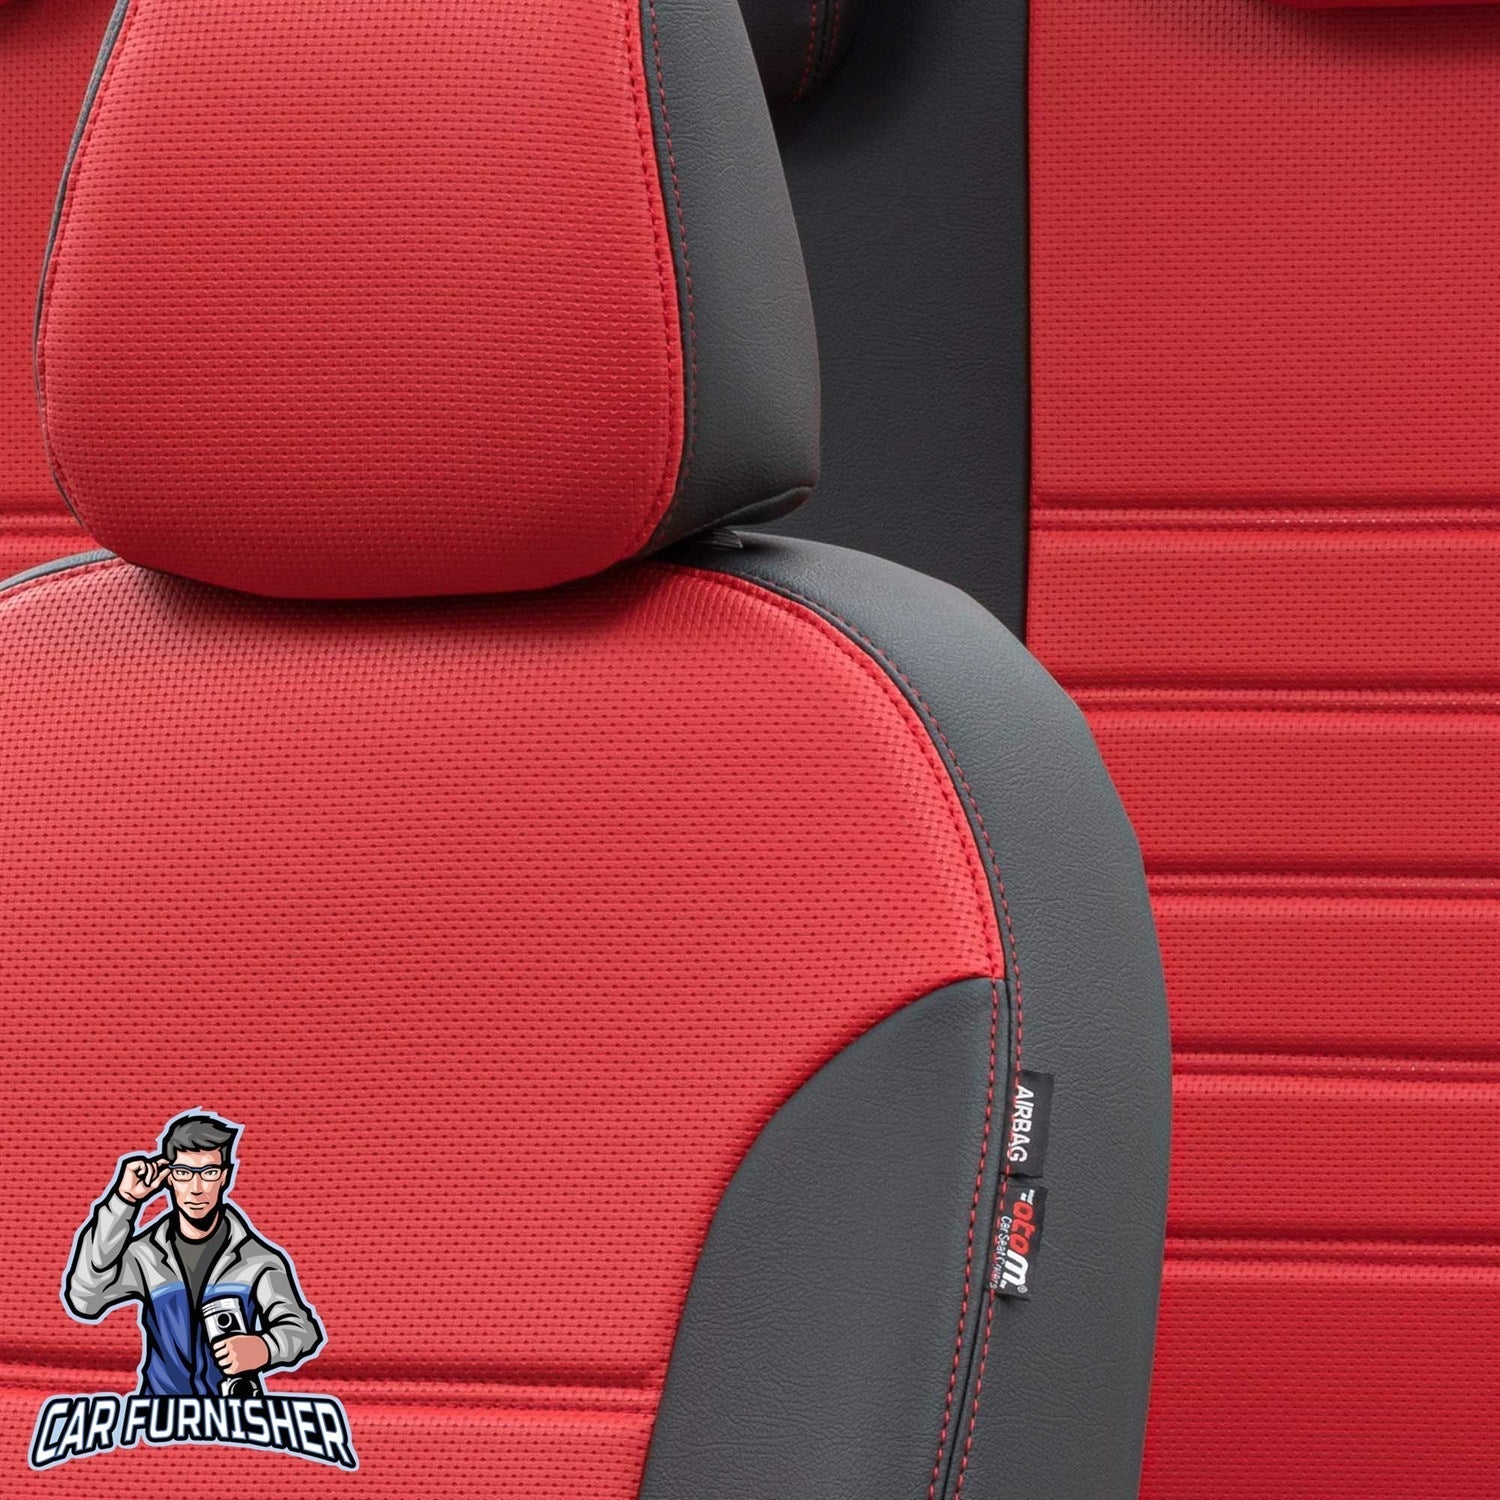 Dacia Dokker Seat Covers New York Leather Design Red Leather